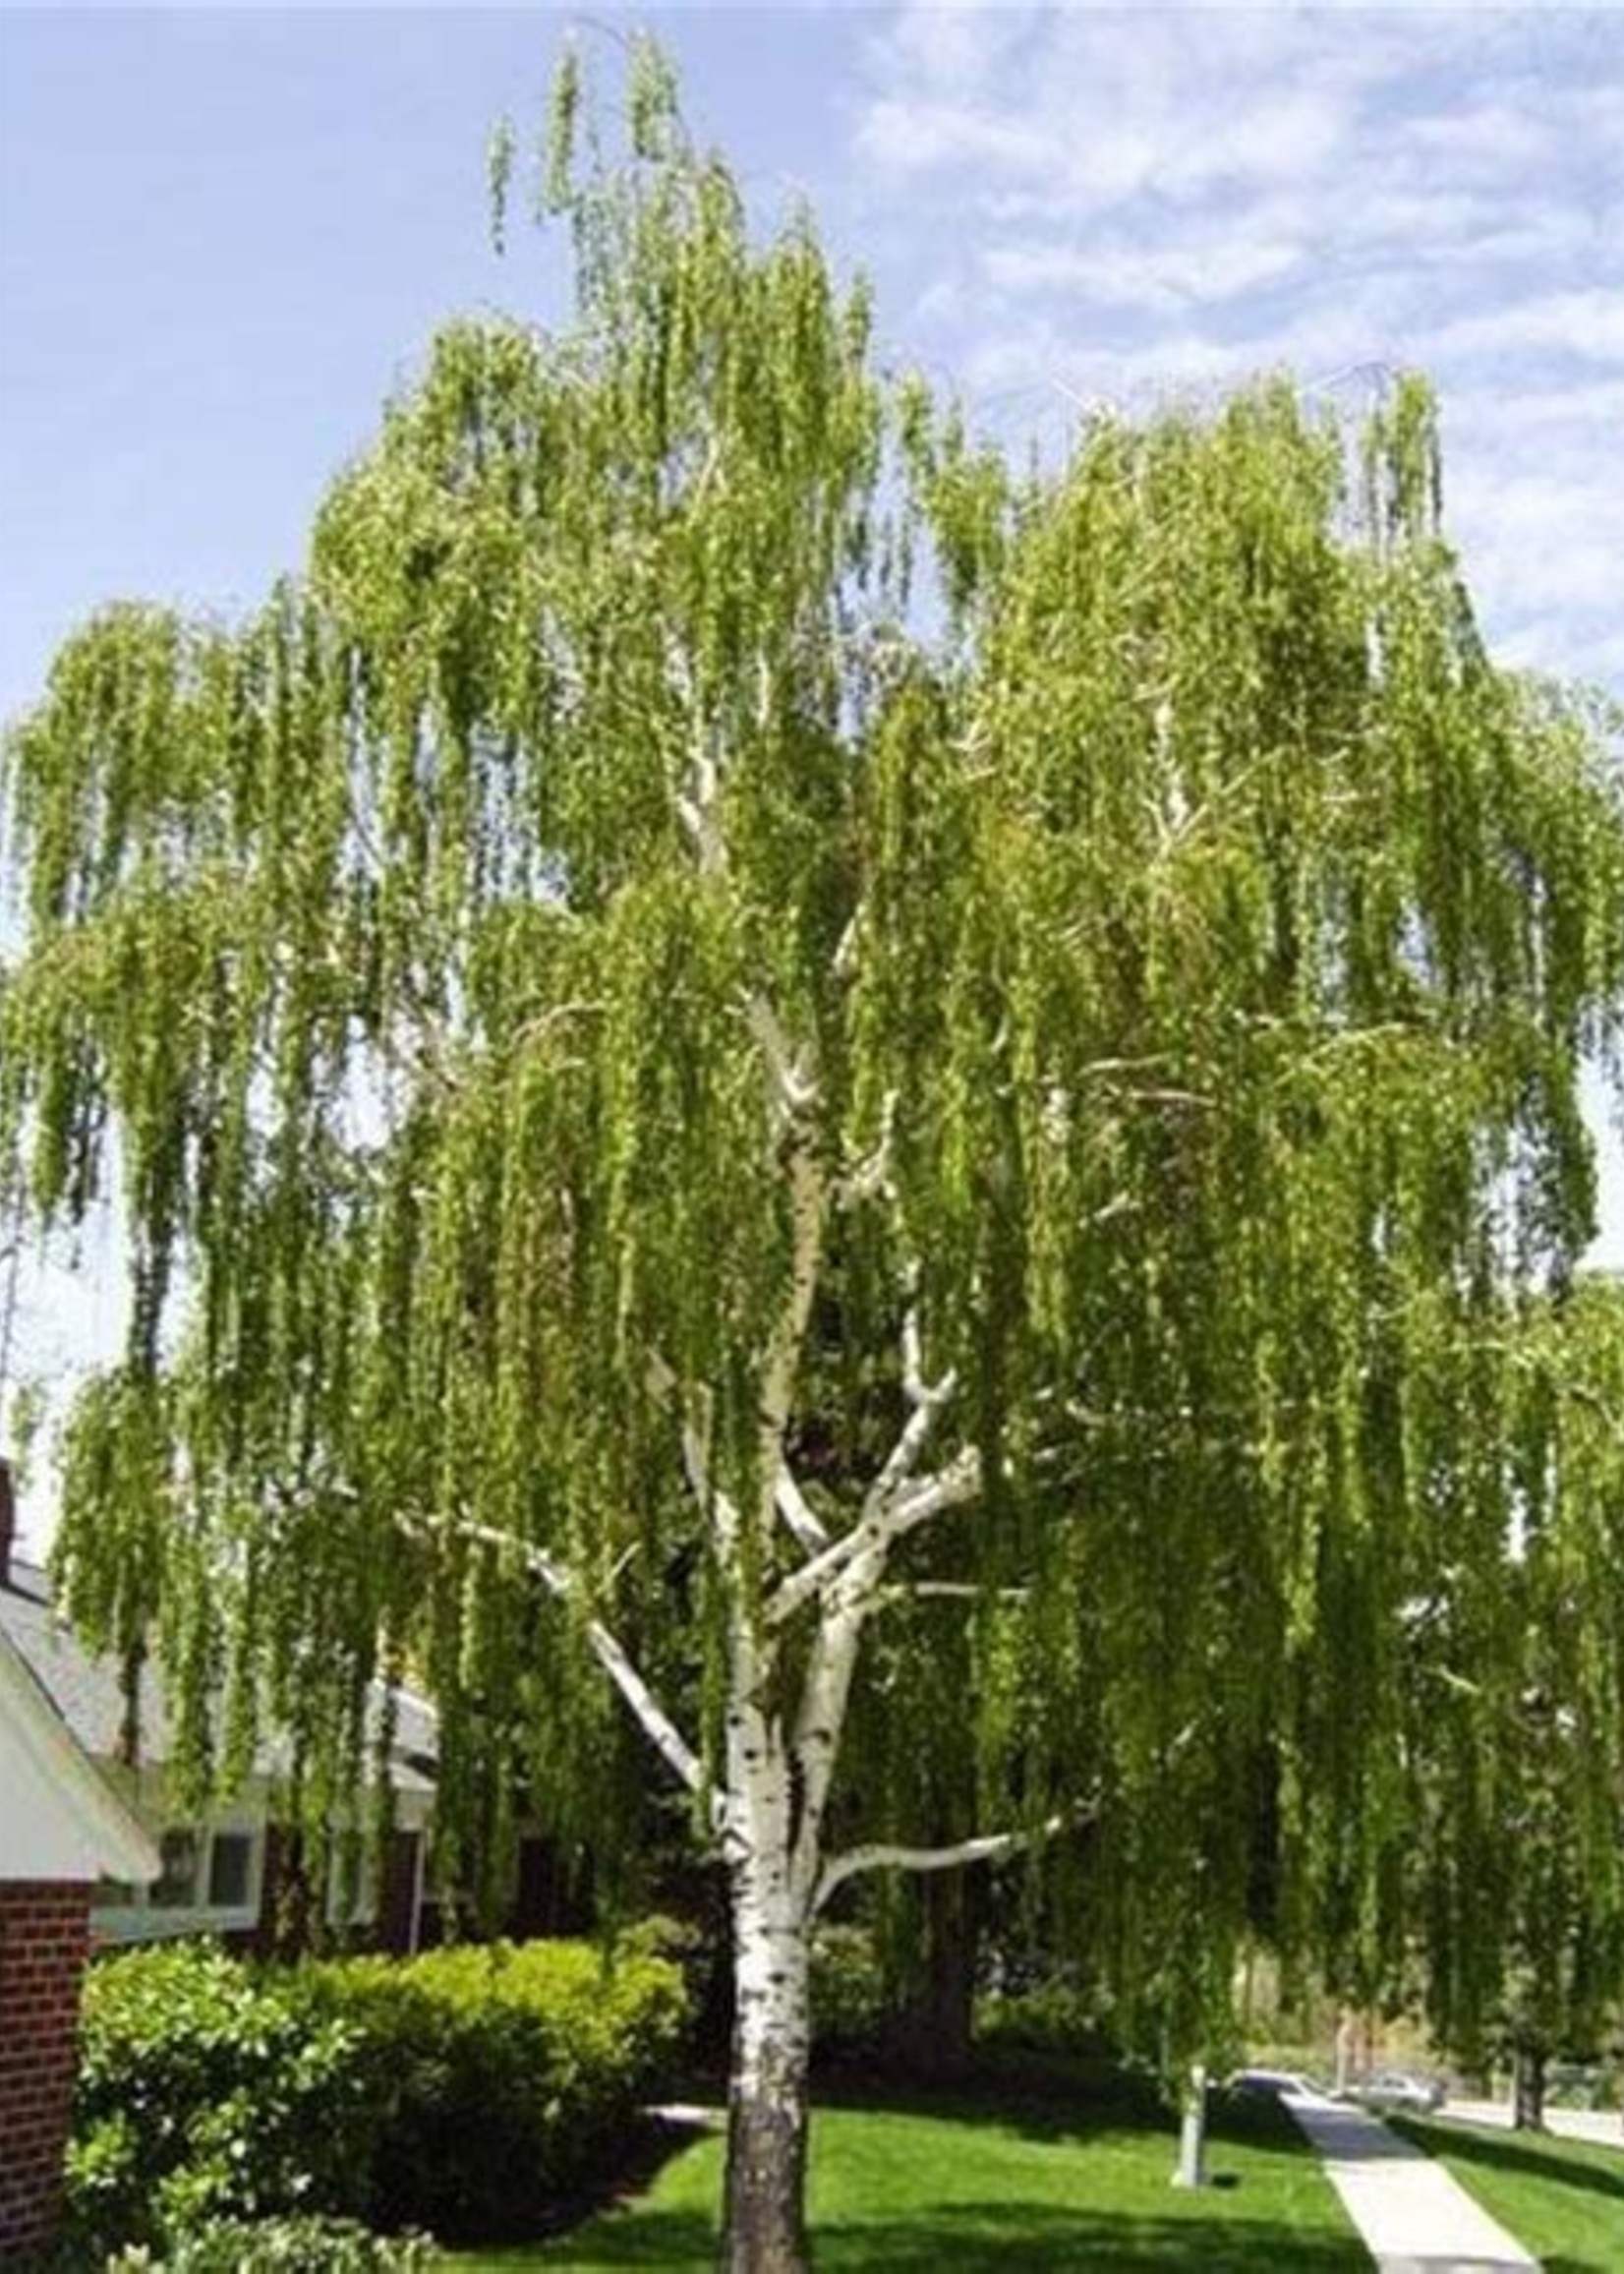 BR - Bare Root Cut Leaf Weeping Birch